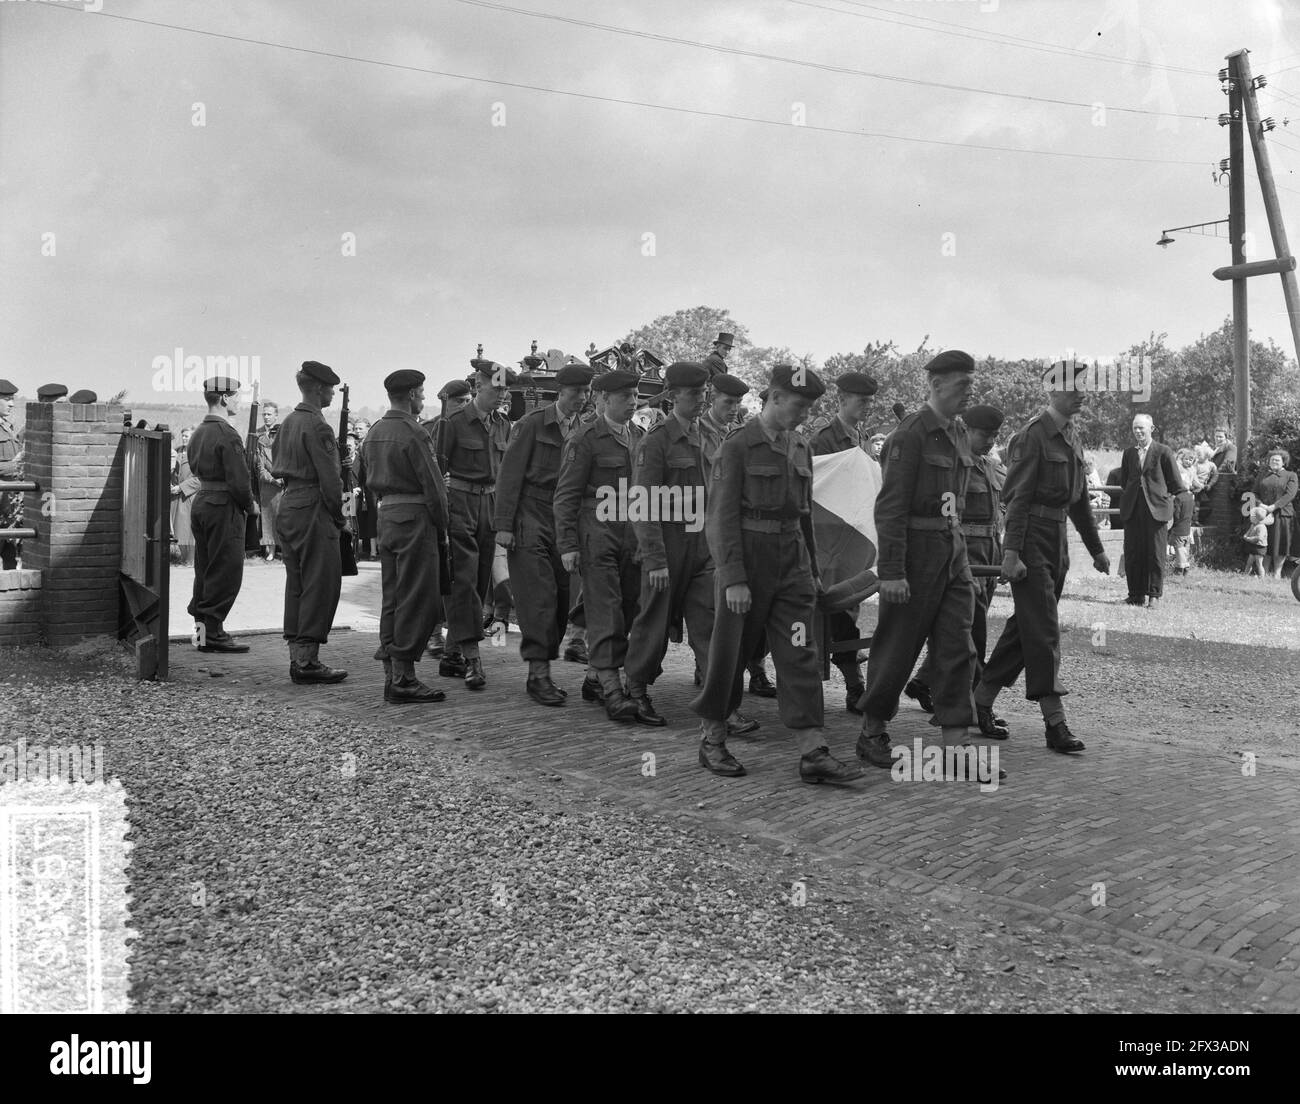 miltiary funeral at Spijk, June 18, 1956, funerals, military, The Netherlands, 20th century press agency photo, news to remember, documentary, historic photography 1945-1990, visual stories, human history of the Twentieth Century, capturing moments in time Stock Photo